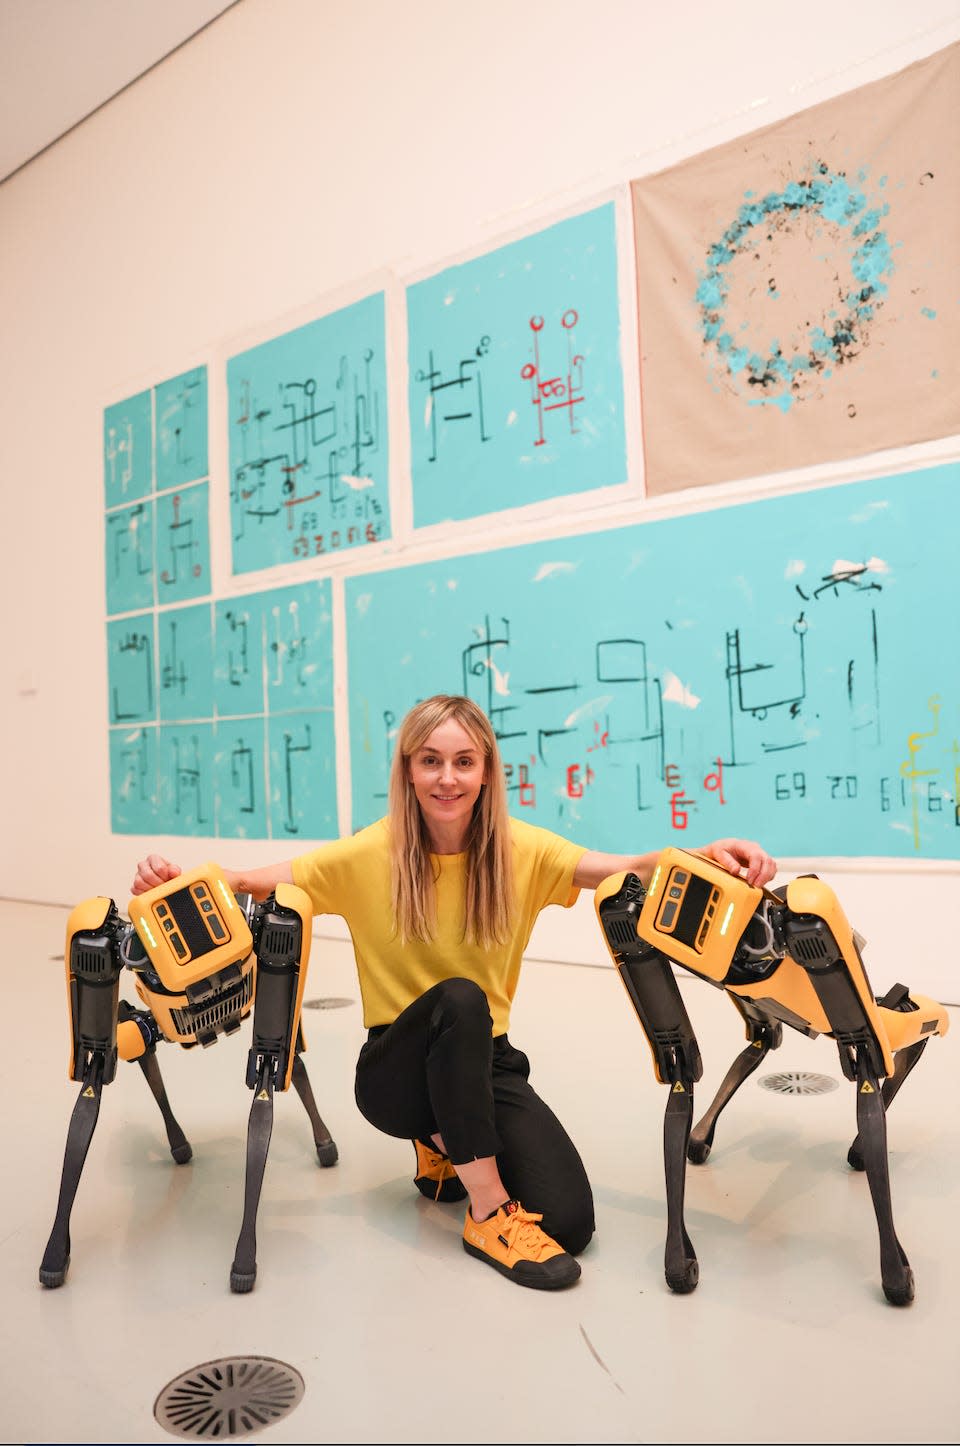 Five paintings created by the robot dogs pictured behind Agnieszka Pilat and two robot dogs